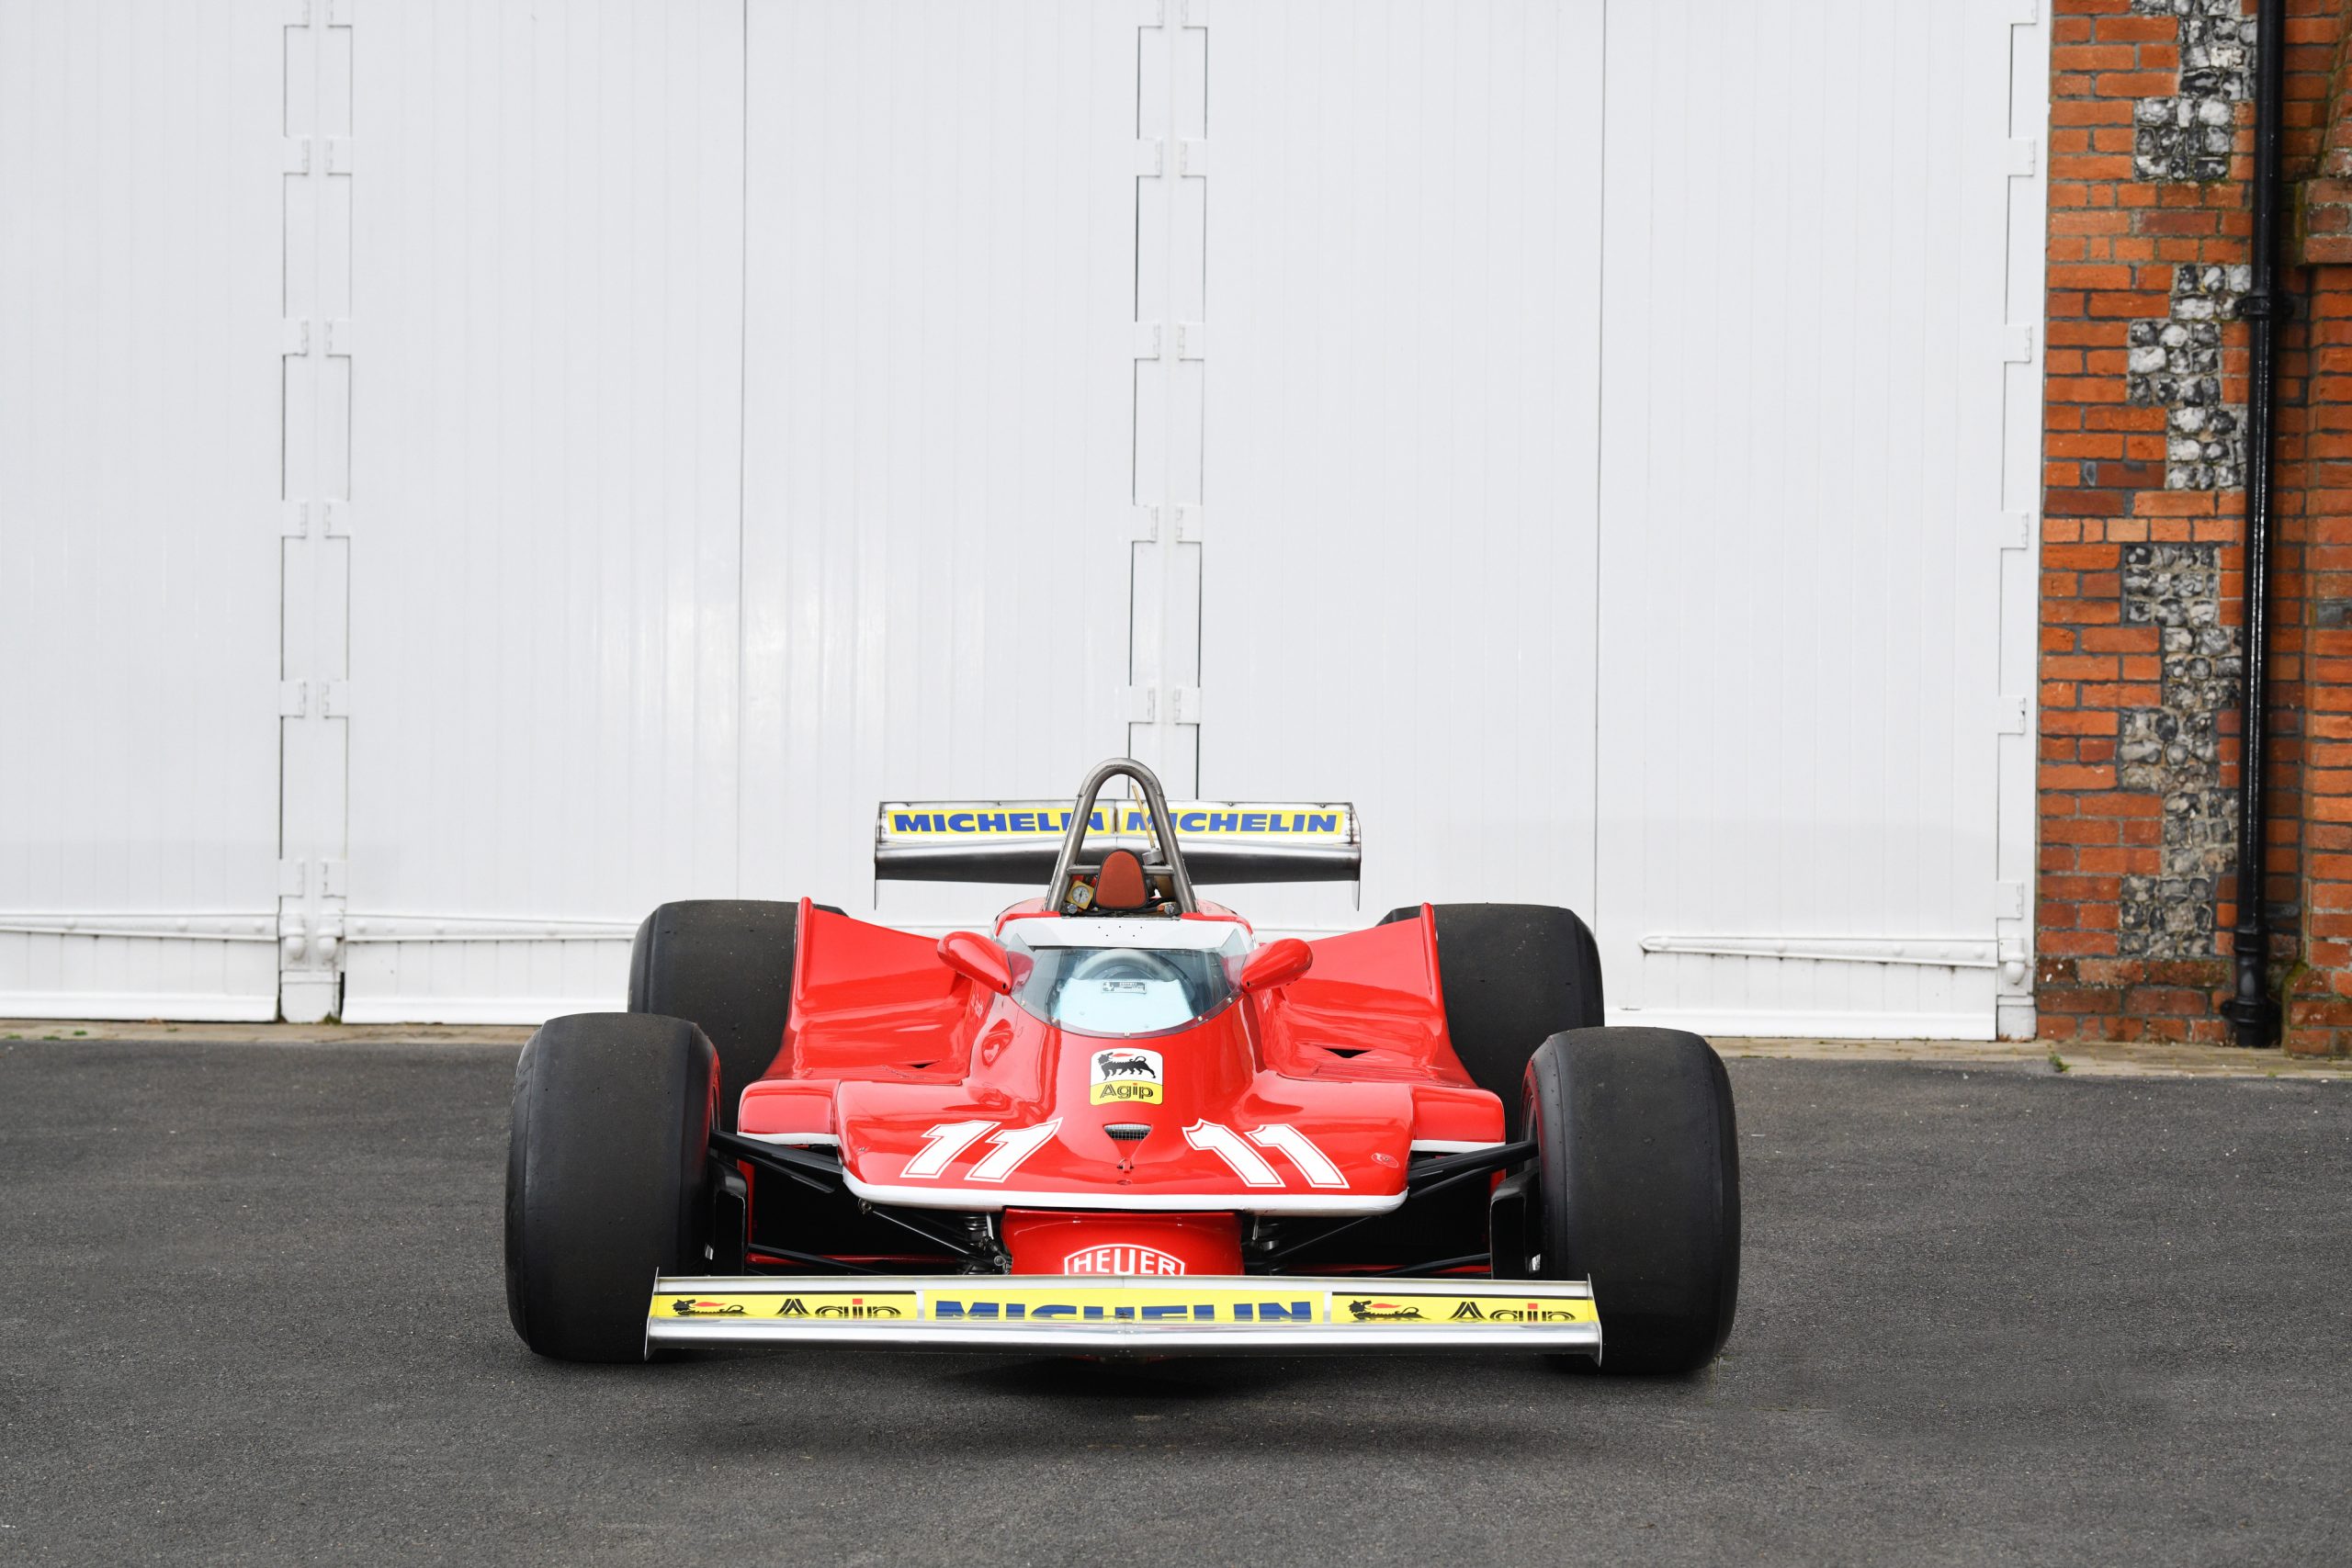 This F1 Title-Winning, $8.2M Ferrari Has One Hell of a Resume